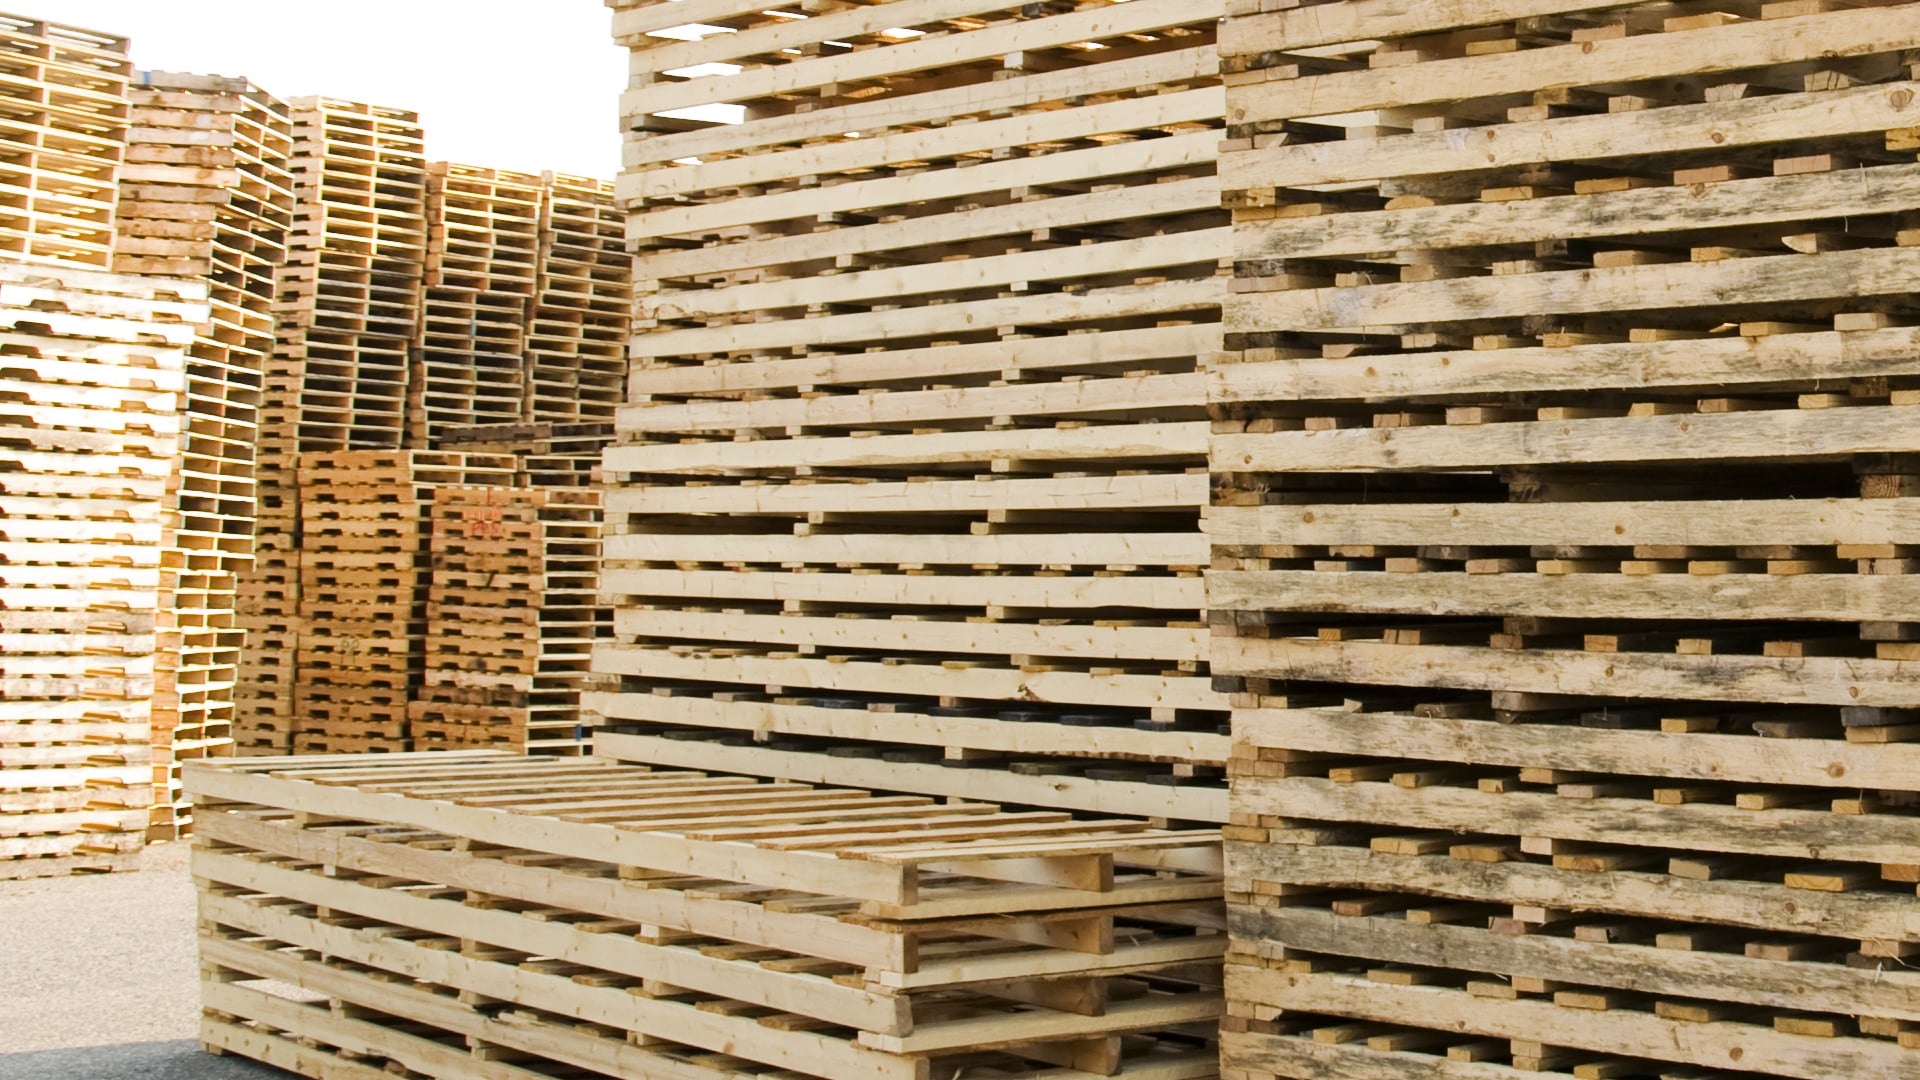 Stack of large wooden pallets outside